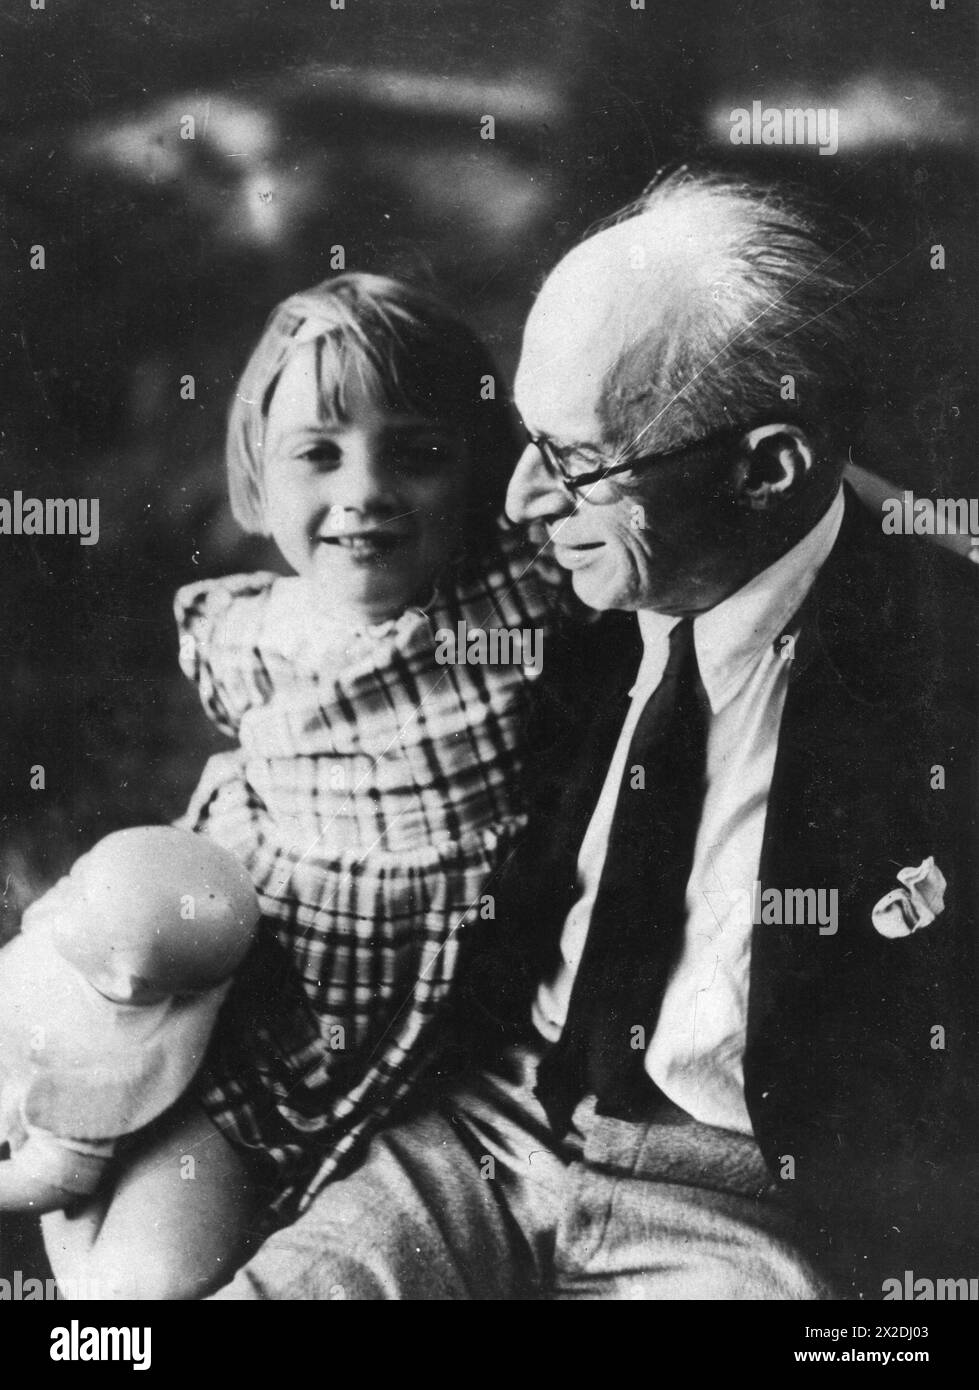 Walden, Herwarth, 16.9.1878 - 31.10.1941, German author / writer and composer, with daughter Sina, ADDITIONAL-RIGHTS-CLEARANCE-INFO-NOT-AVAILABLE Stock Photo